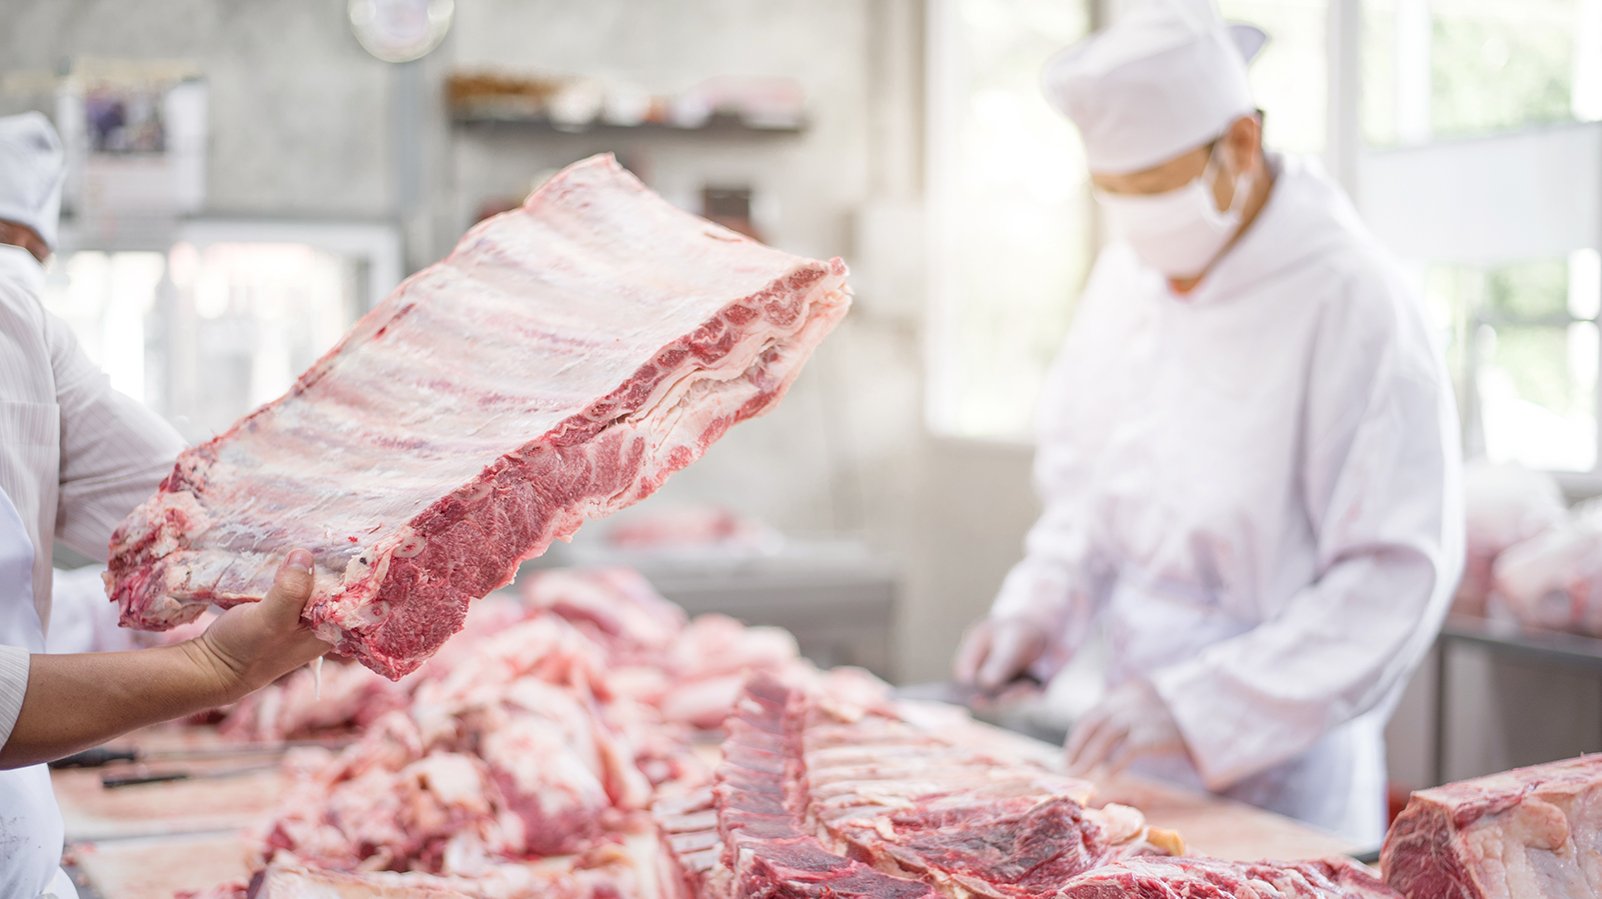 Slash Meat Consumption And Support Vaccine Passports To Cut Threat Of Infectious Diseases, Expert Says